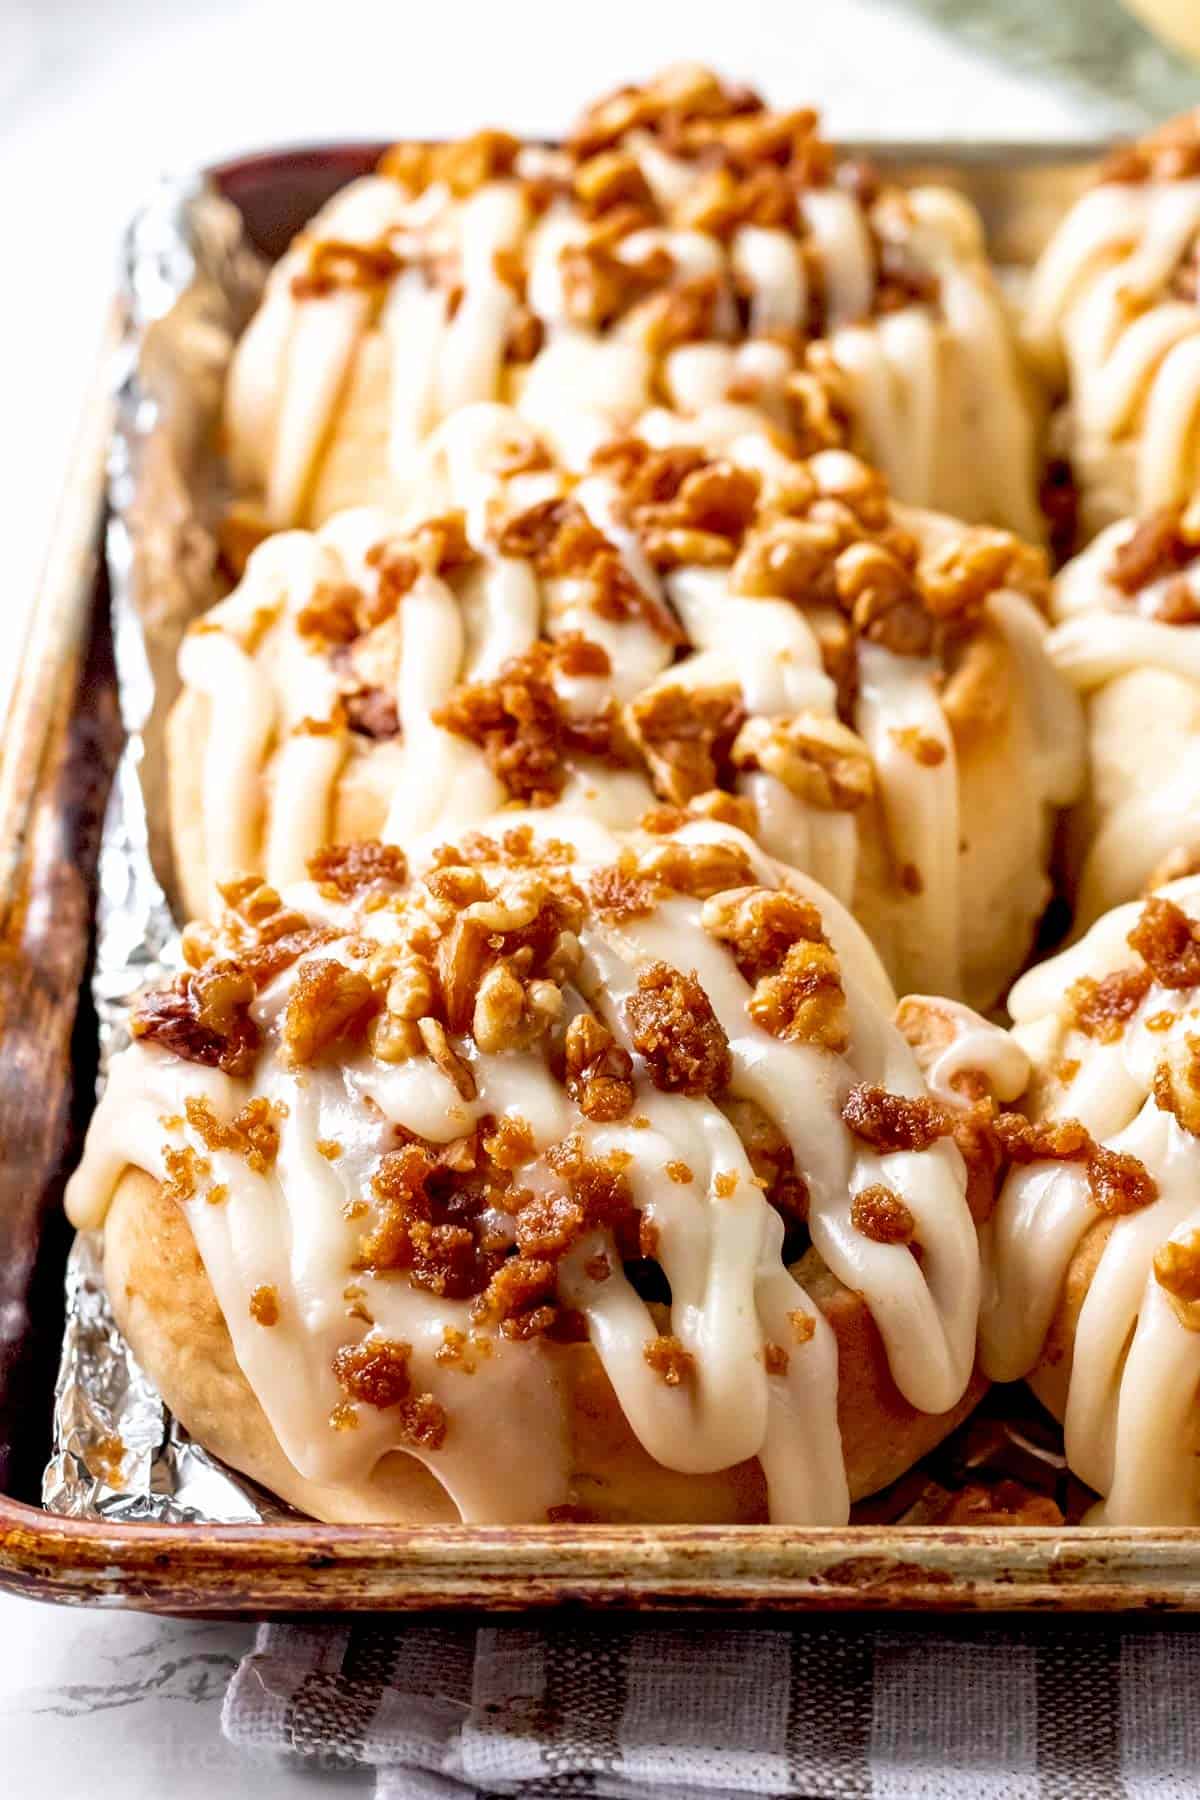 Baked and frosted banana cinnamon rolls in metal pan.